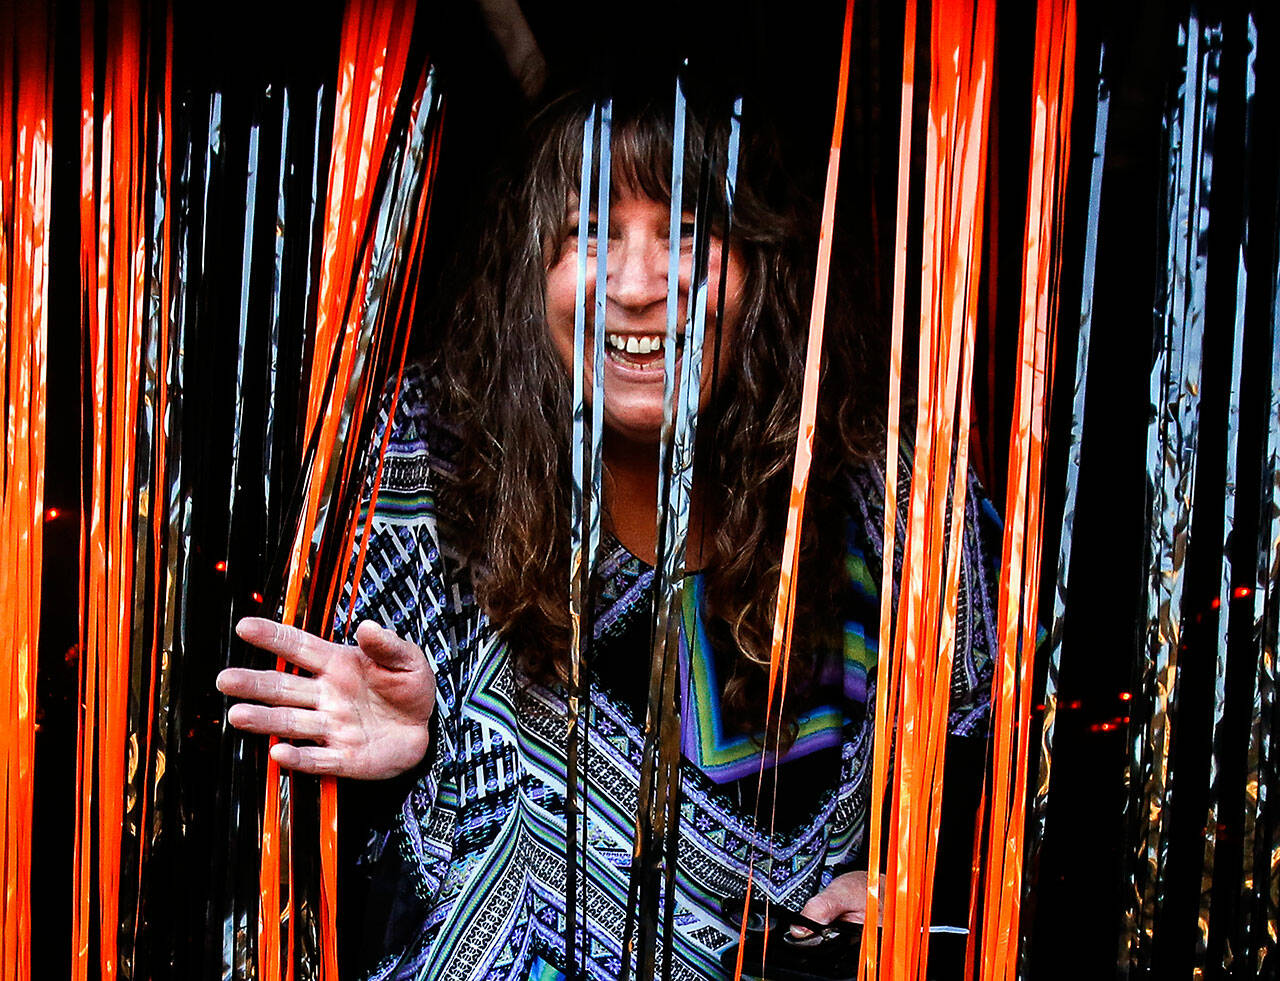 Ivy Fulmer emerges from a spooky tunnel she built for the children who visited her on Halloween in Everett’s Riverside nighborhood in 2019. (Dan Bates / Herald file)